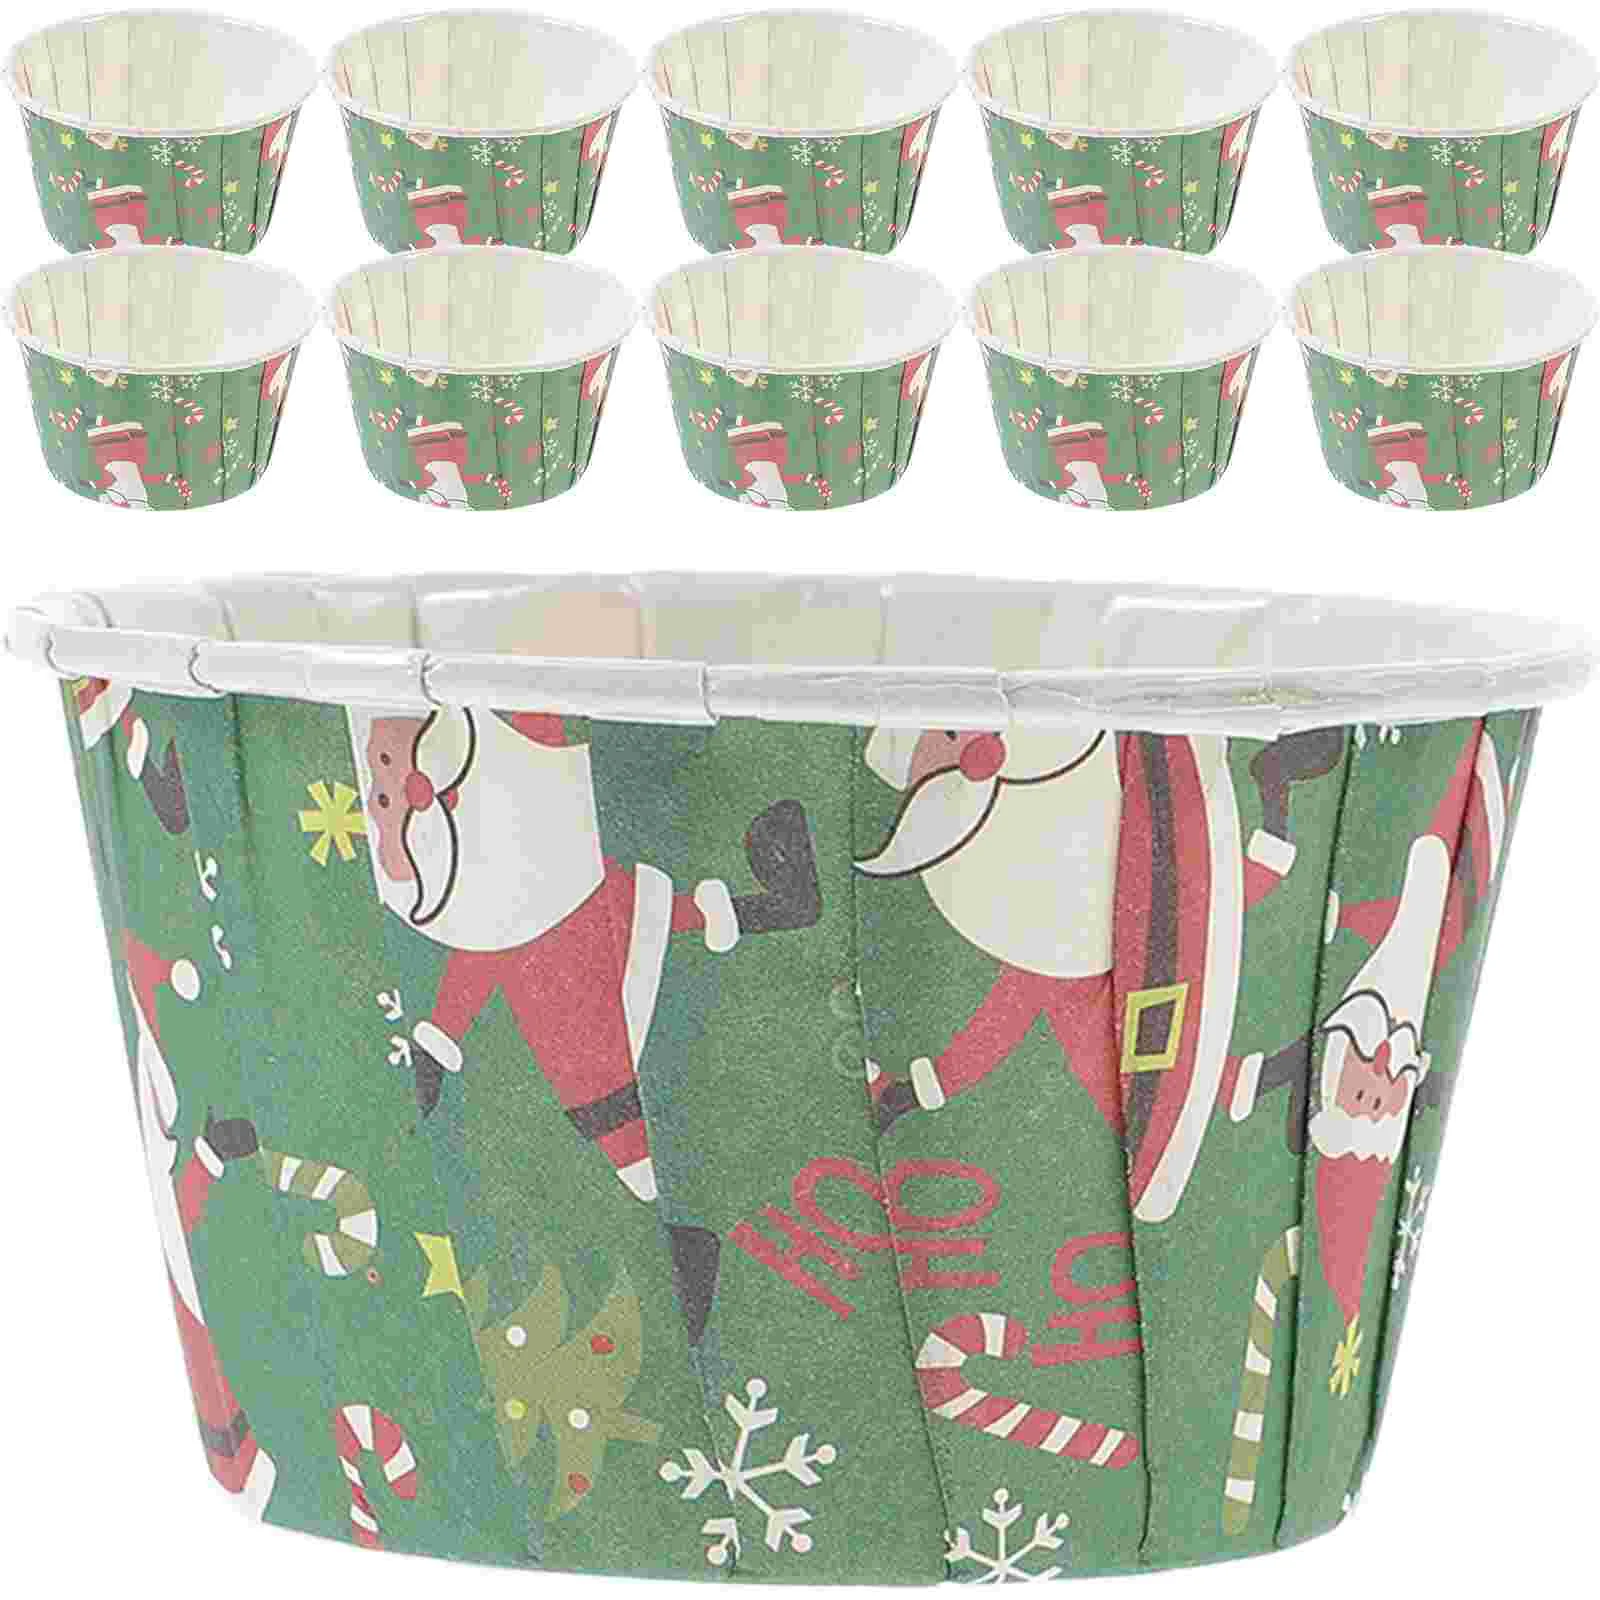 

100 Pcs Cupcake Wrappers Mini Liners Christmas Wrapping Paper Small Decor Xmas Theme Muffin Baking